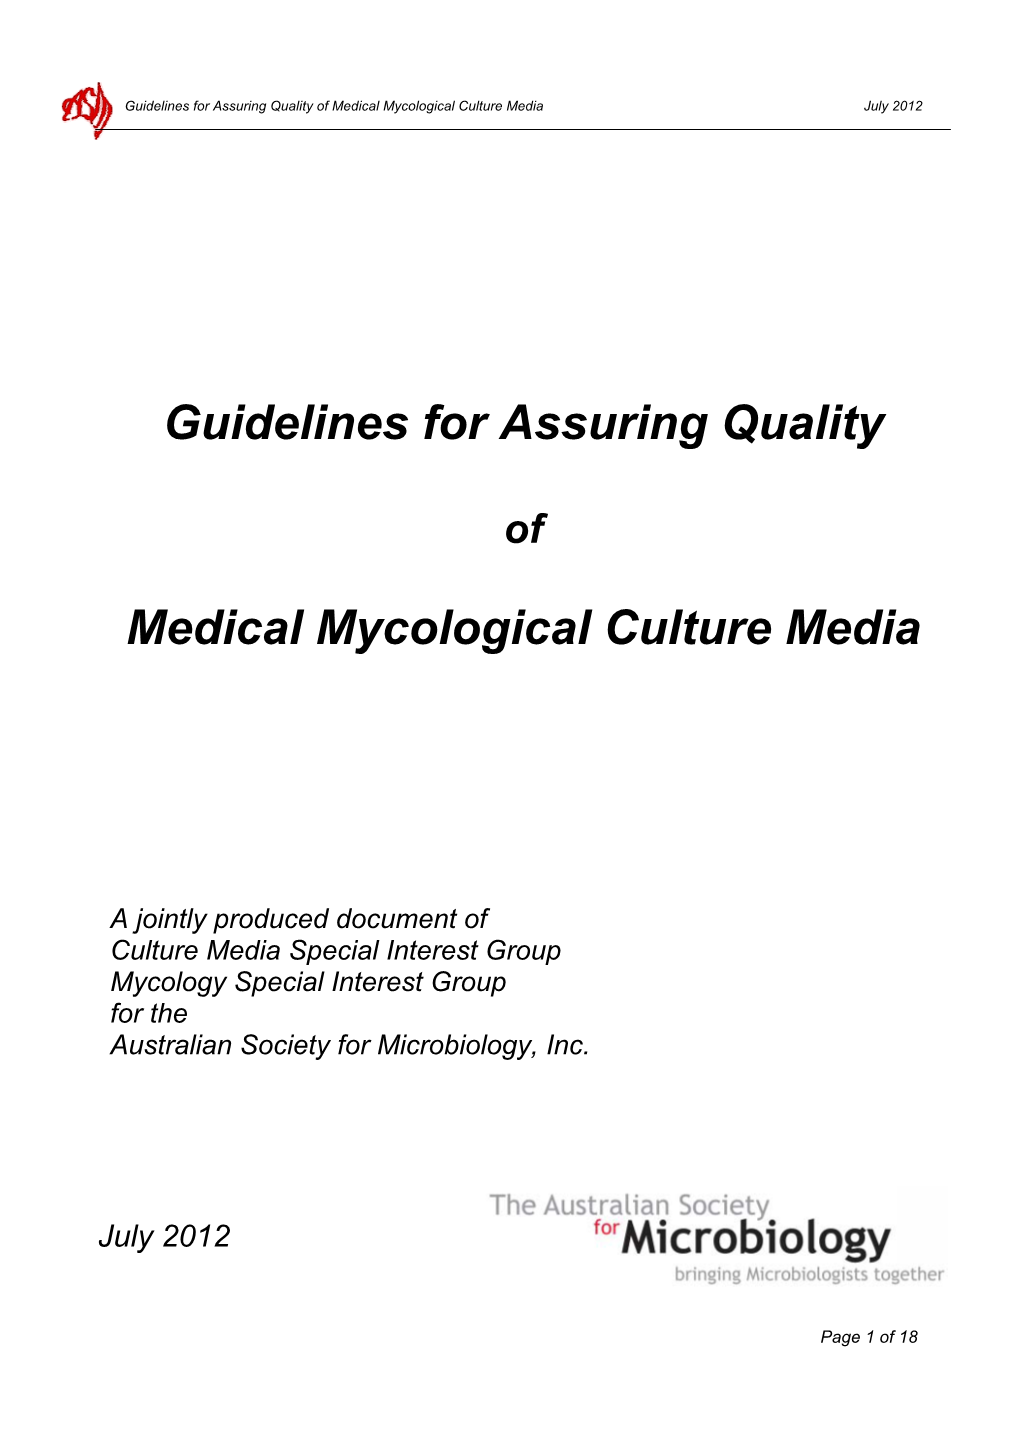 Guidelines for Assuring Quality Medical Mycological Culture Media